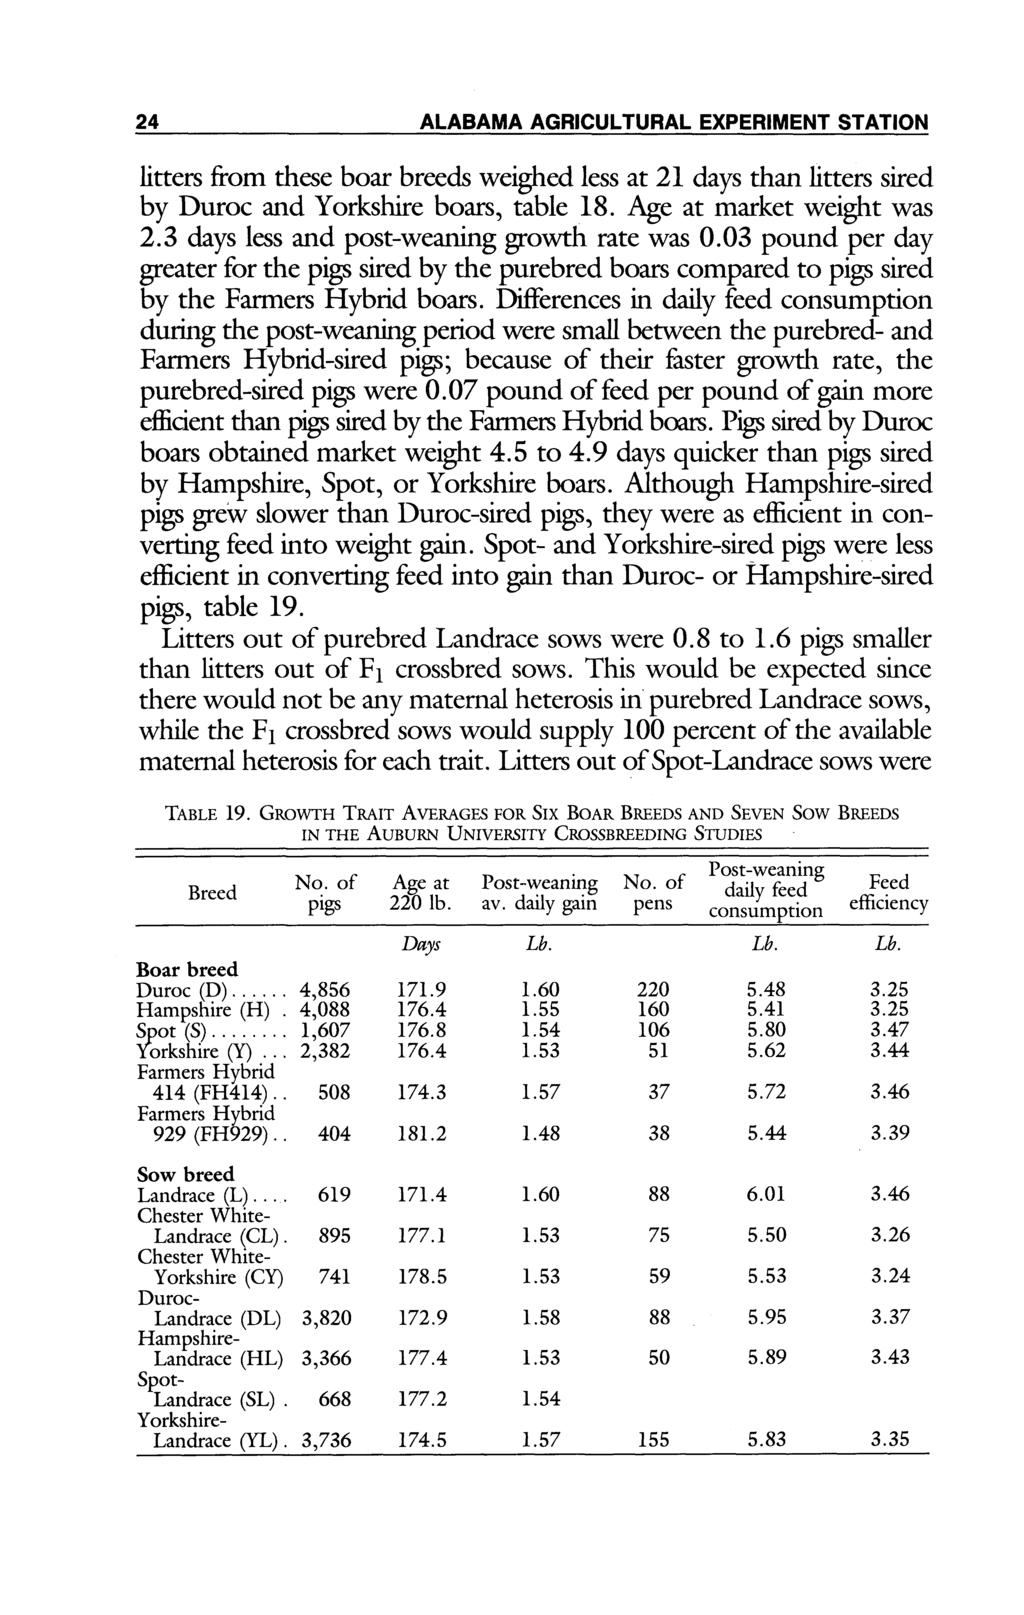 24 ALABAMA AGRICULTURAL EXPERIMENT STATION litters from these boar breeds weighed less at 21 days than litters sired by Duroc and Yorkshire boars, table 18. Age at market weight was 2.